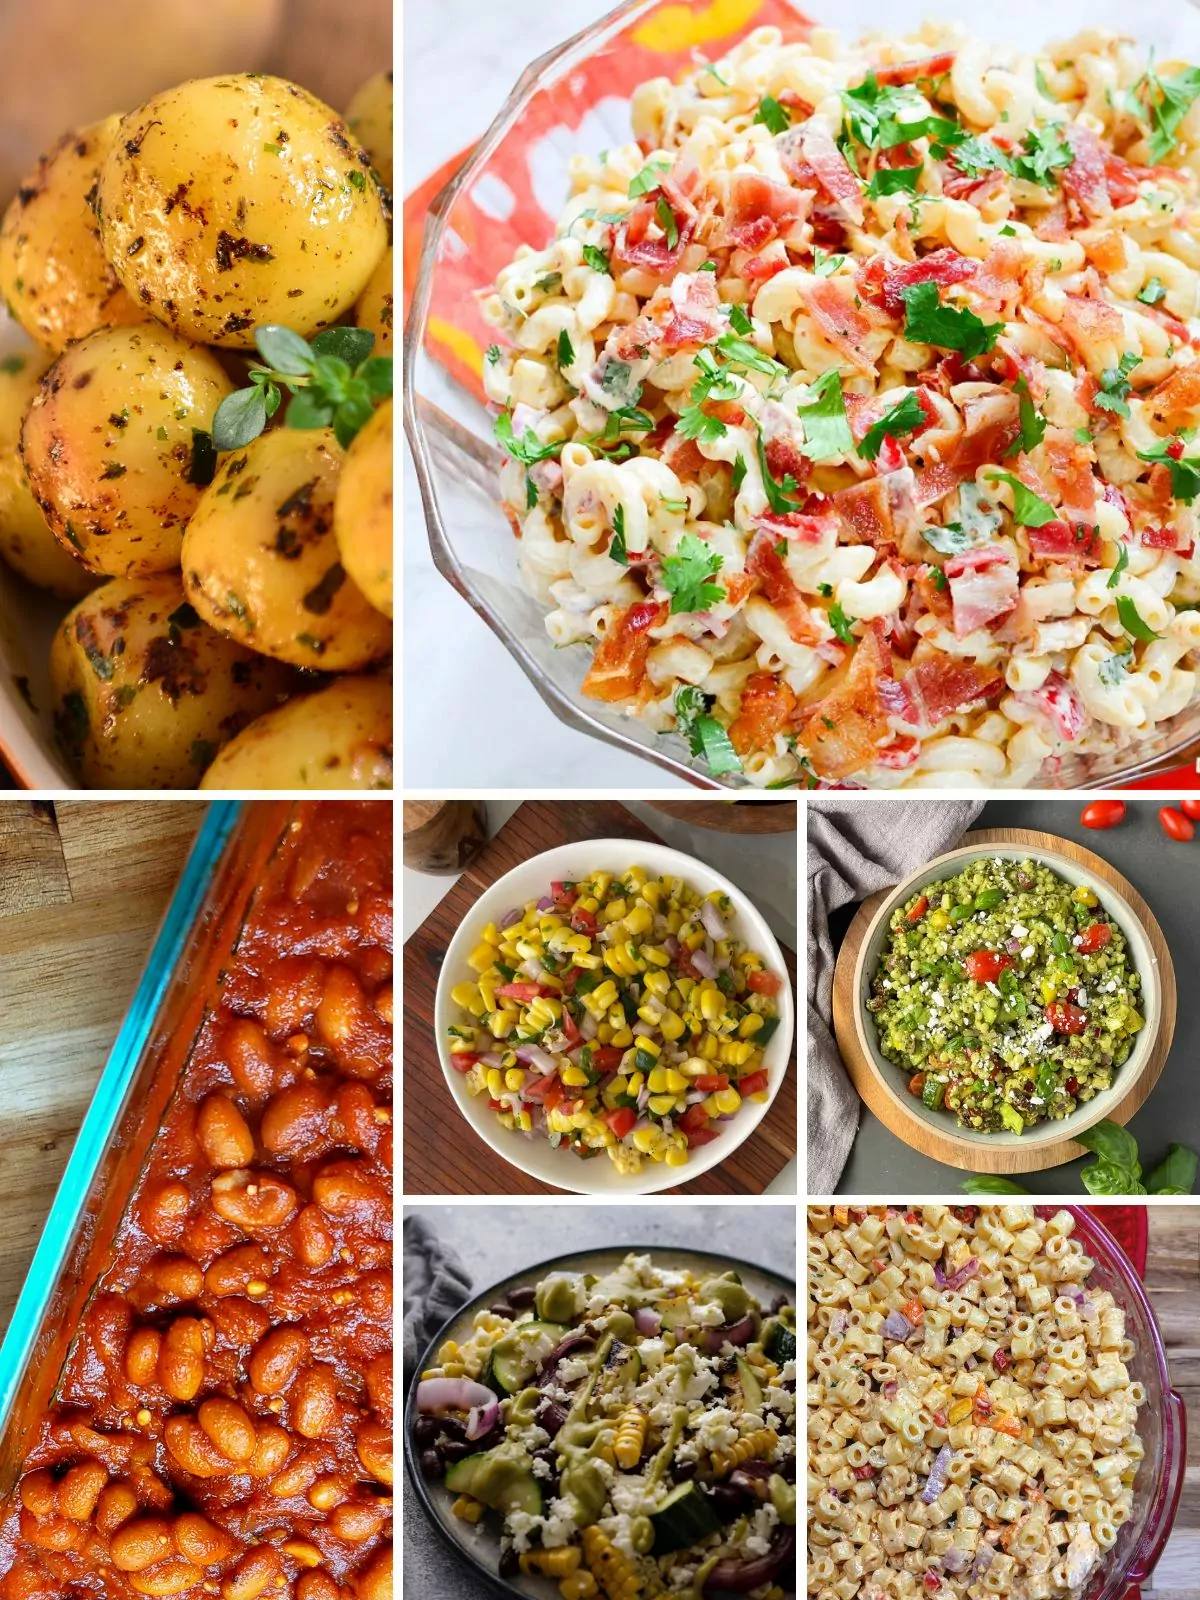 A collage of 7 side dishes to serve for a backyard barbecue.